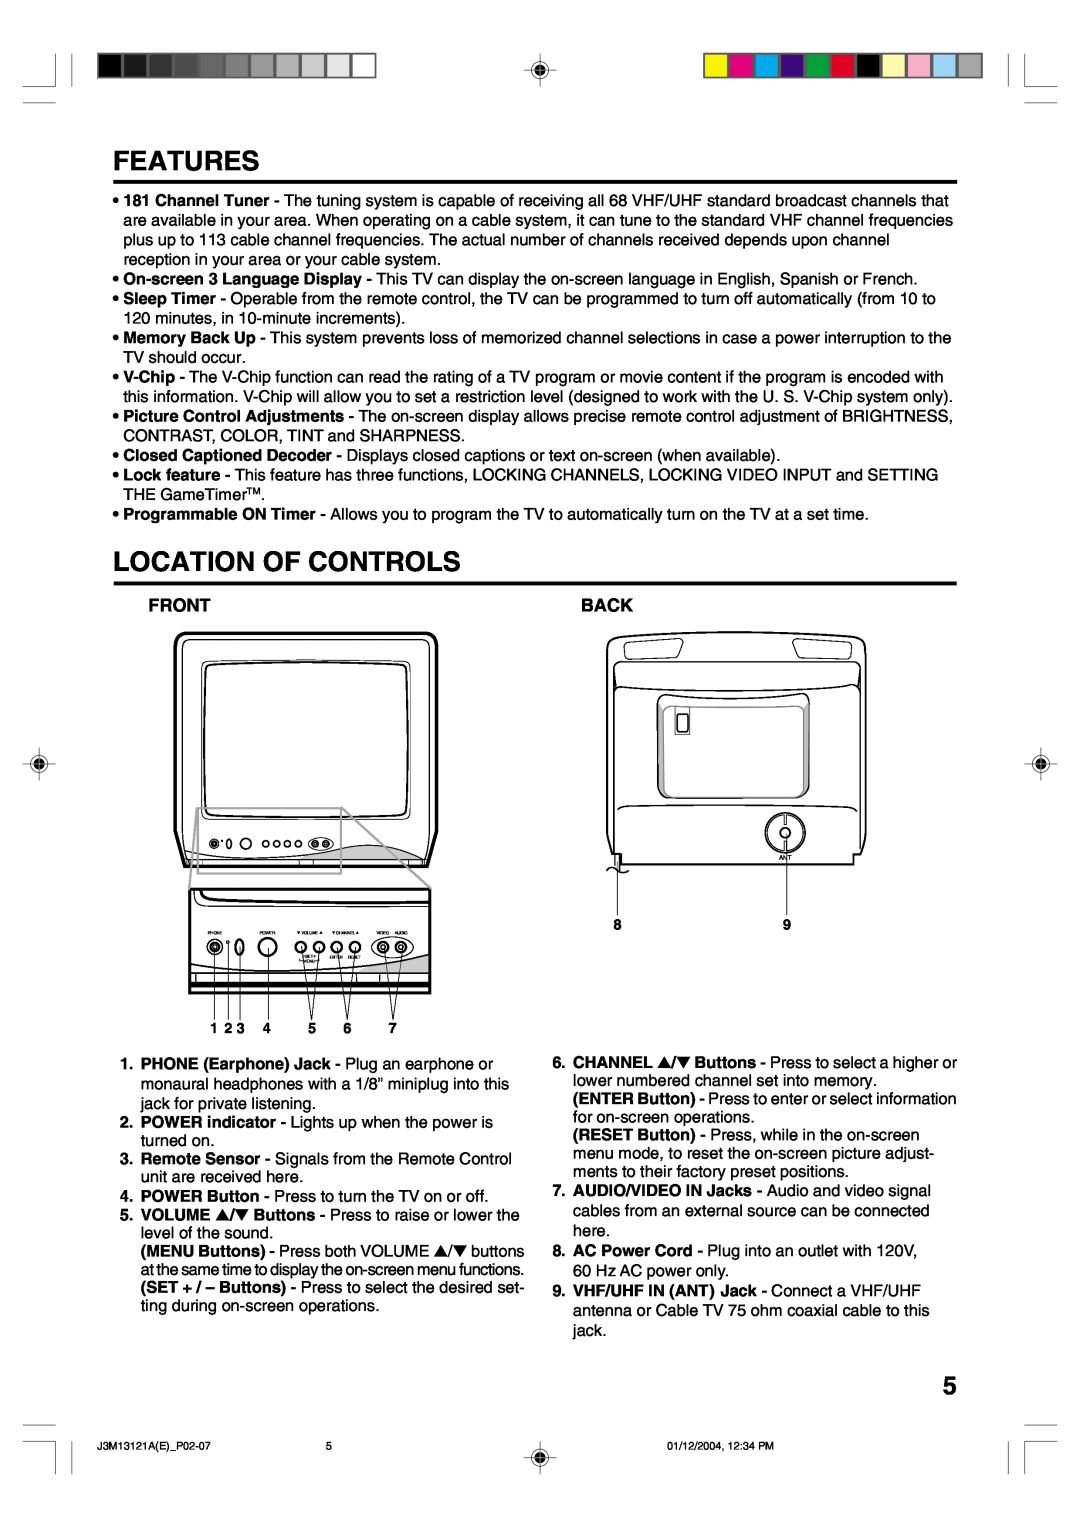 Toshiba 13A25 manual Features, Location Of Controls, Front, Back 